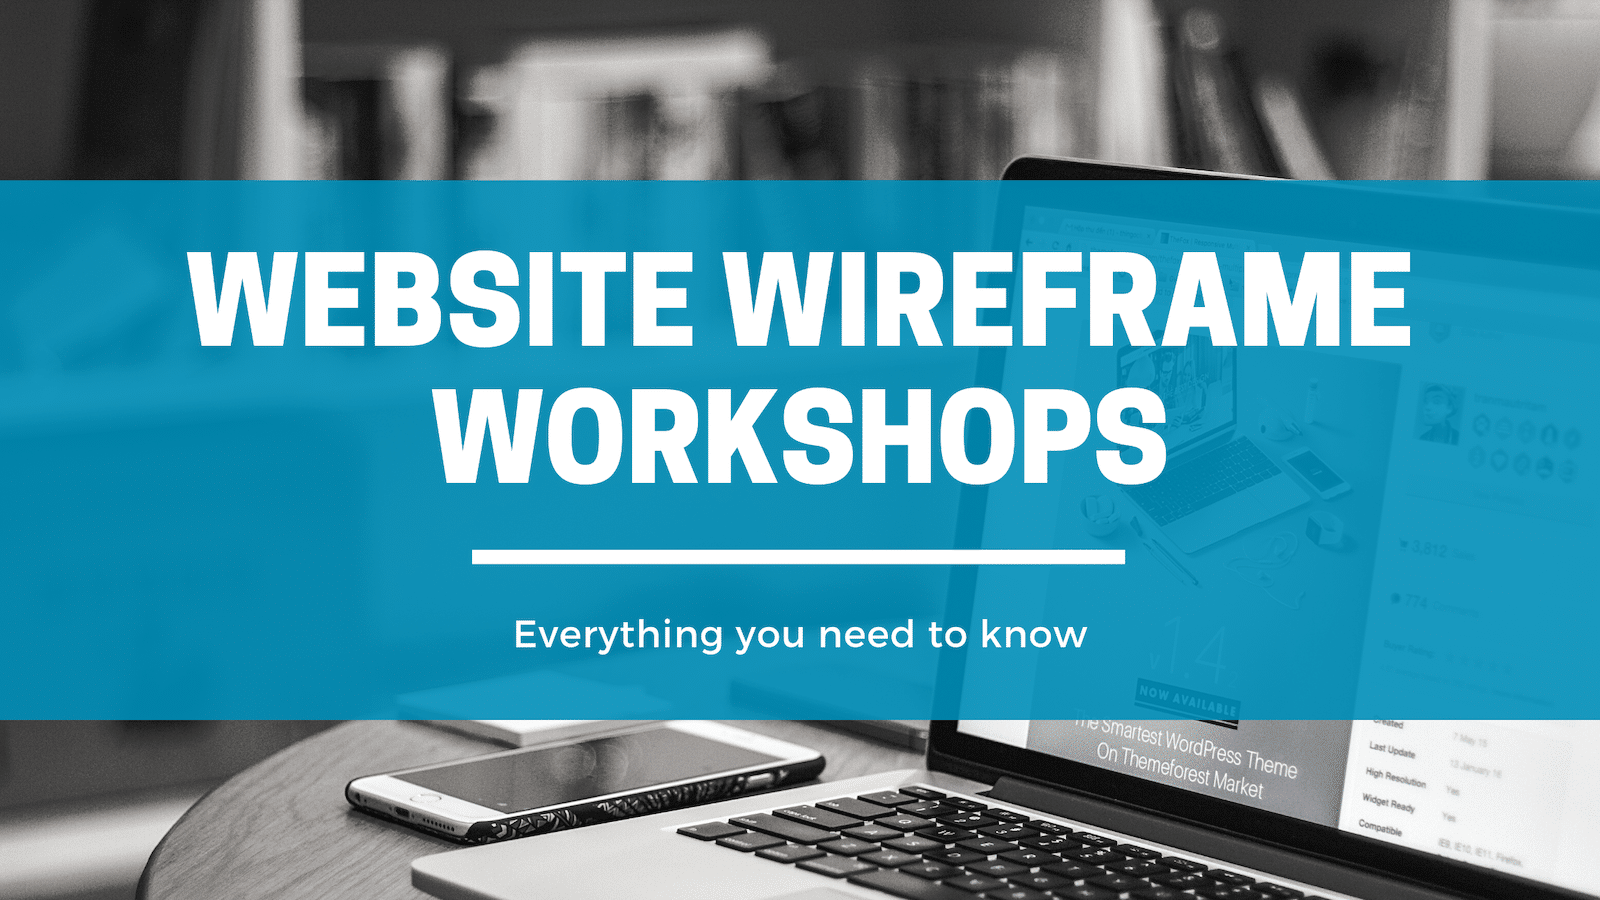 Website Wireframe Workshops Need to Know - Click Results - Blog - Featured Image